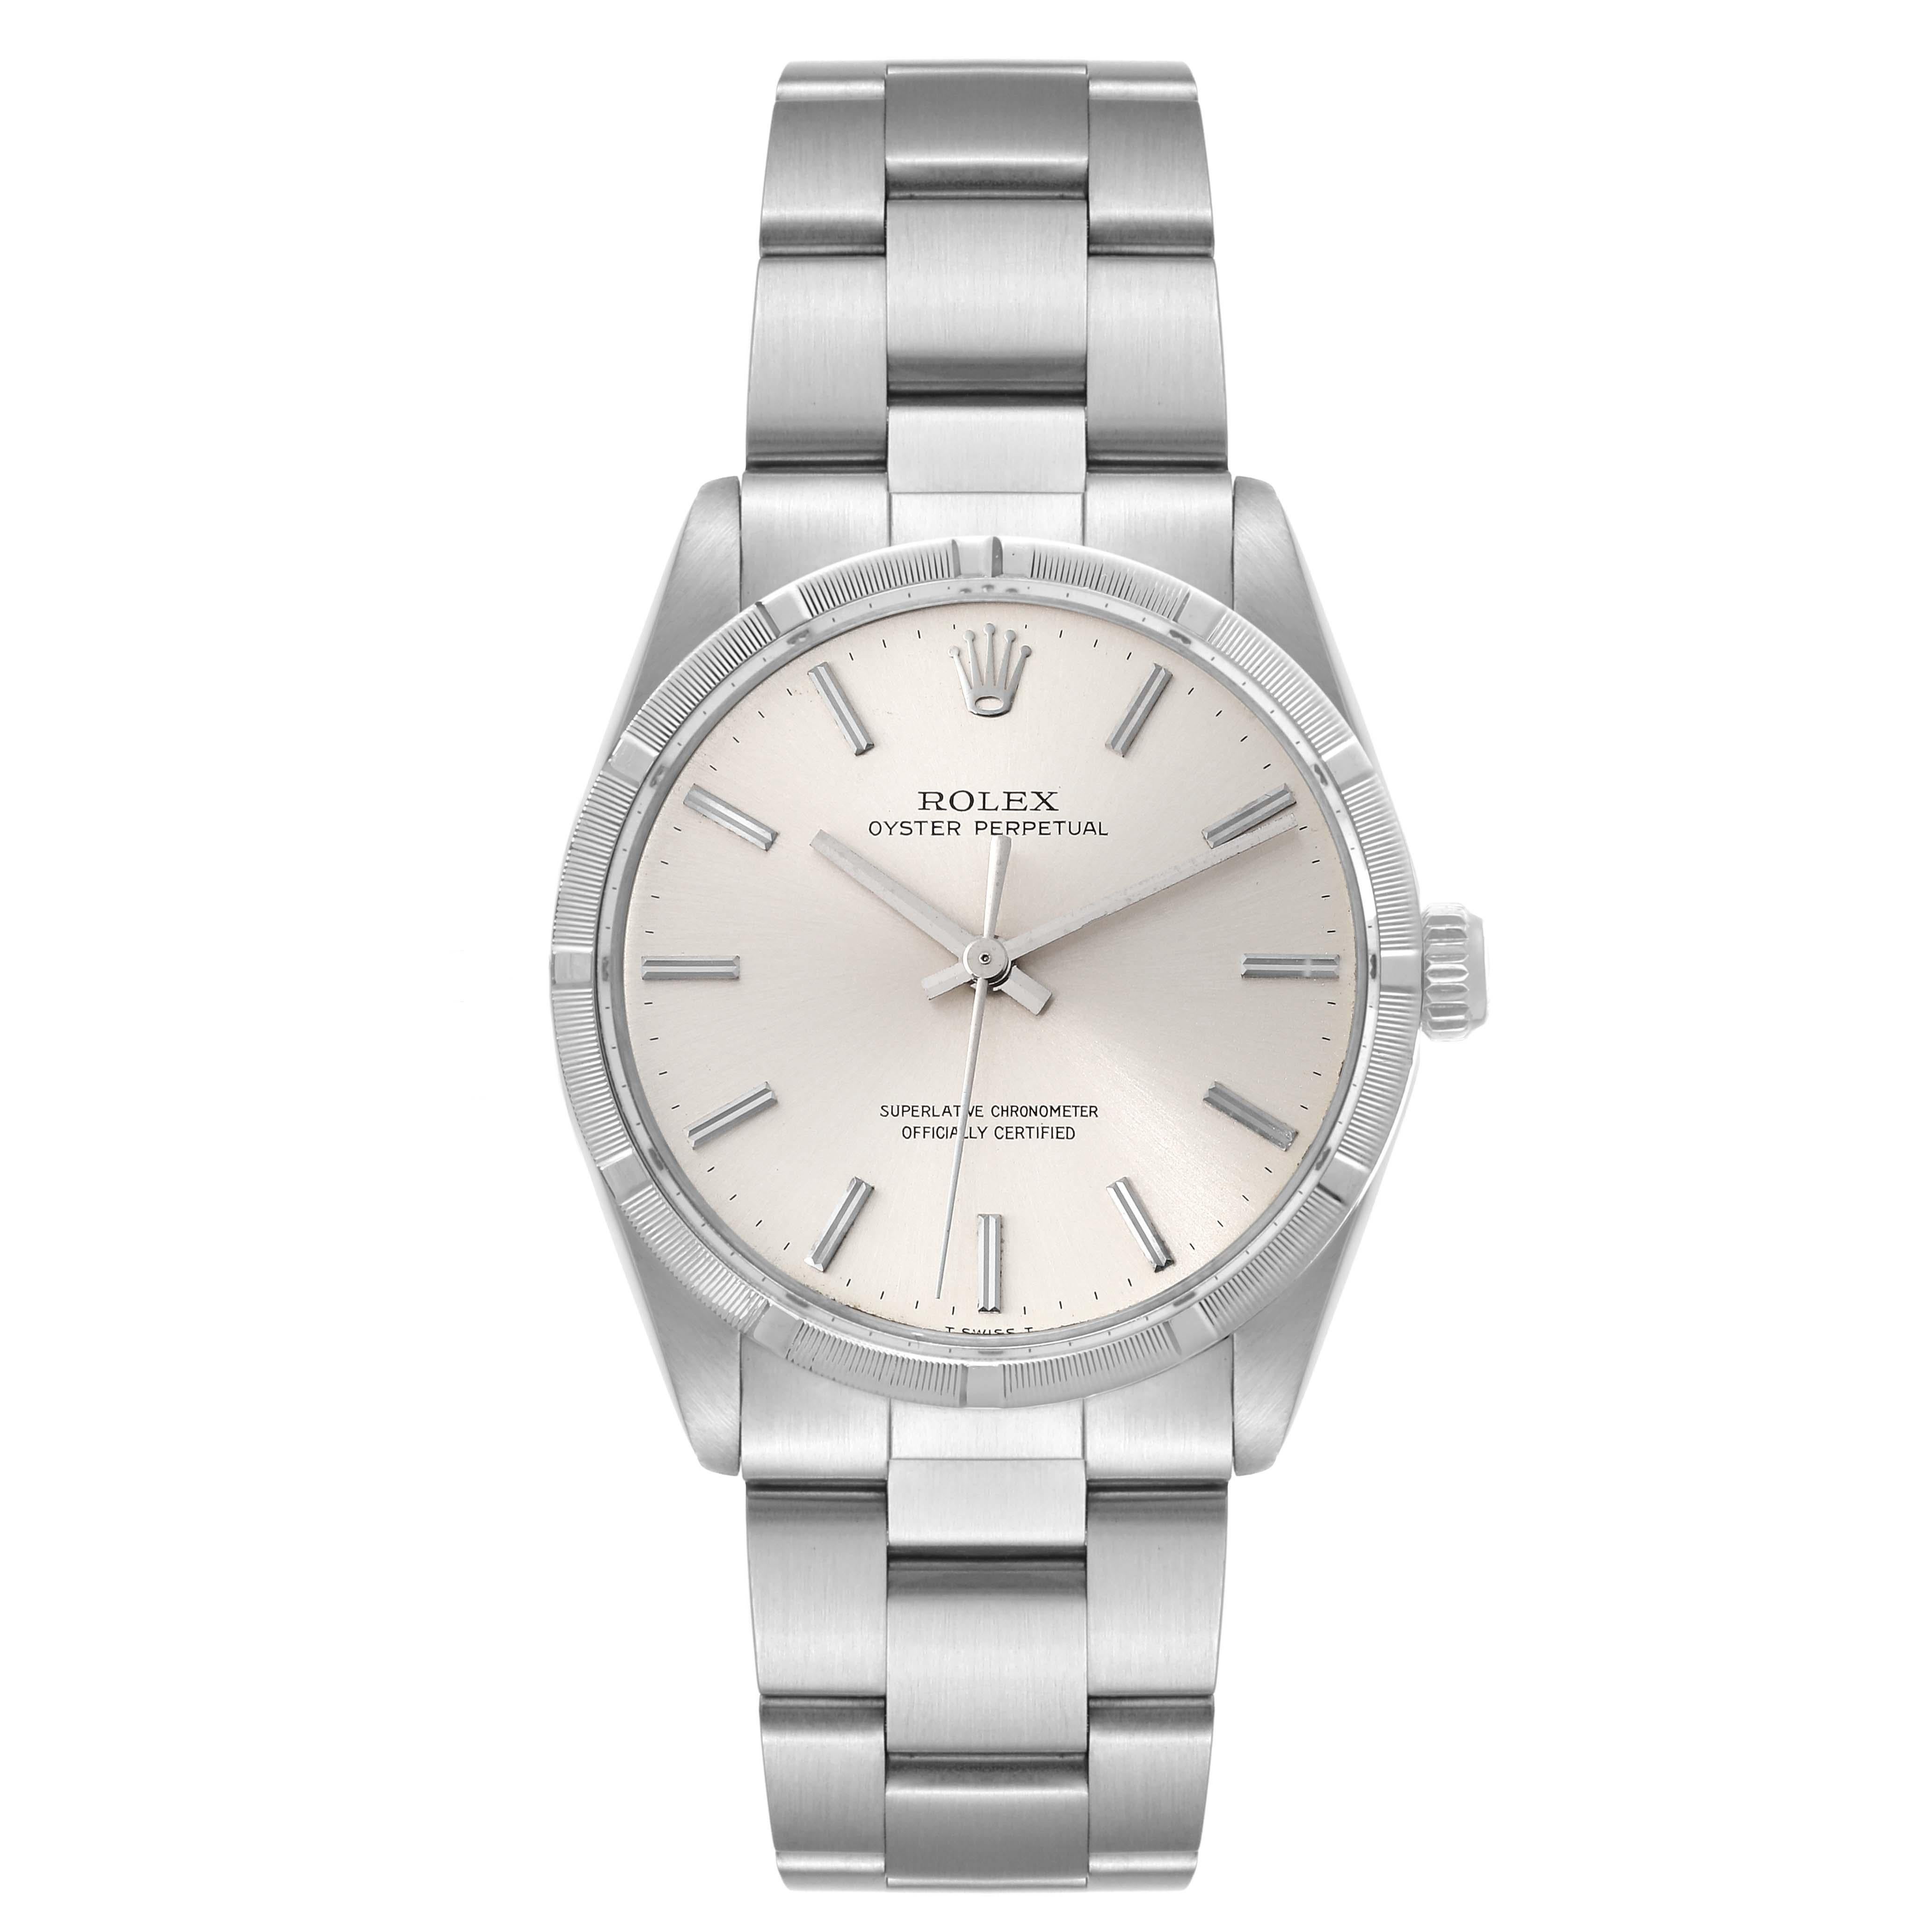 Rolex Oyster Perpetual Engine Turned Bezel Vintage Steel Mens Watch 1007. Officially certified chronometer automatic self-winding movement. Stainless steel oyster case 34.0 mm in diameter.  Rolex logo on the crown. Stainless steel engine turned